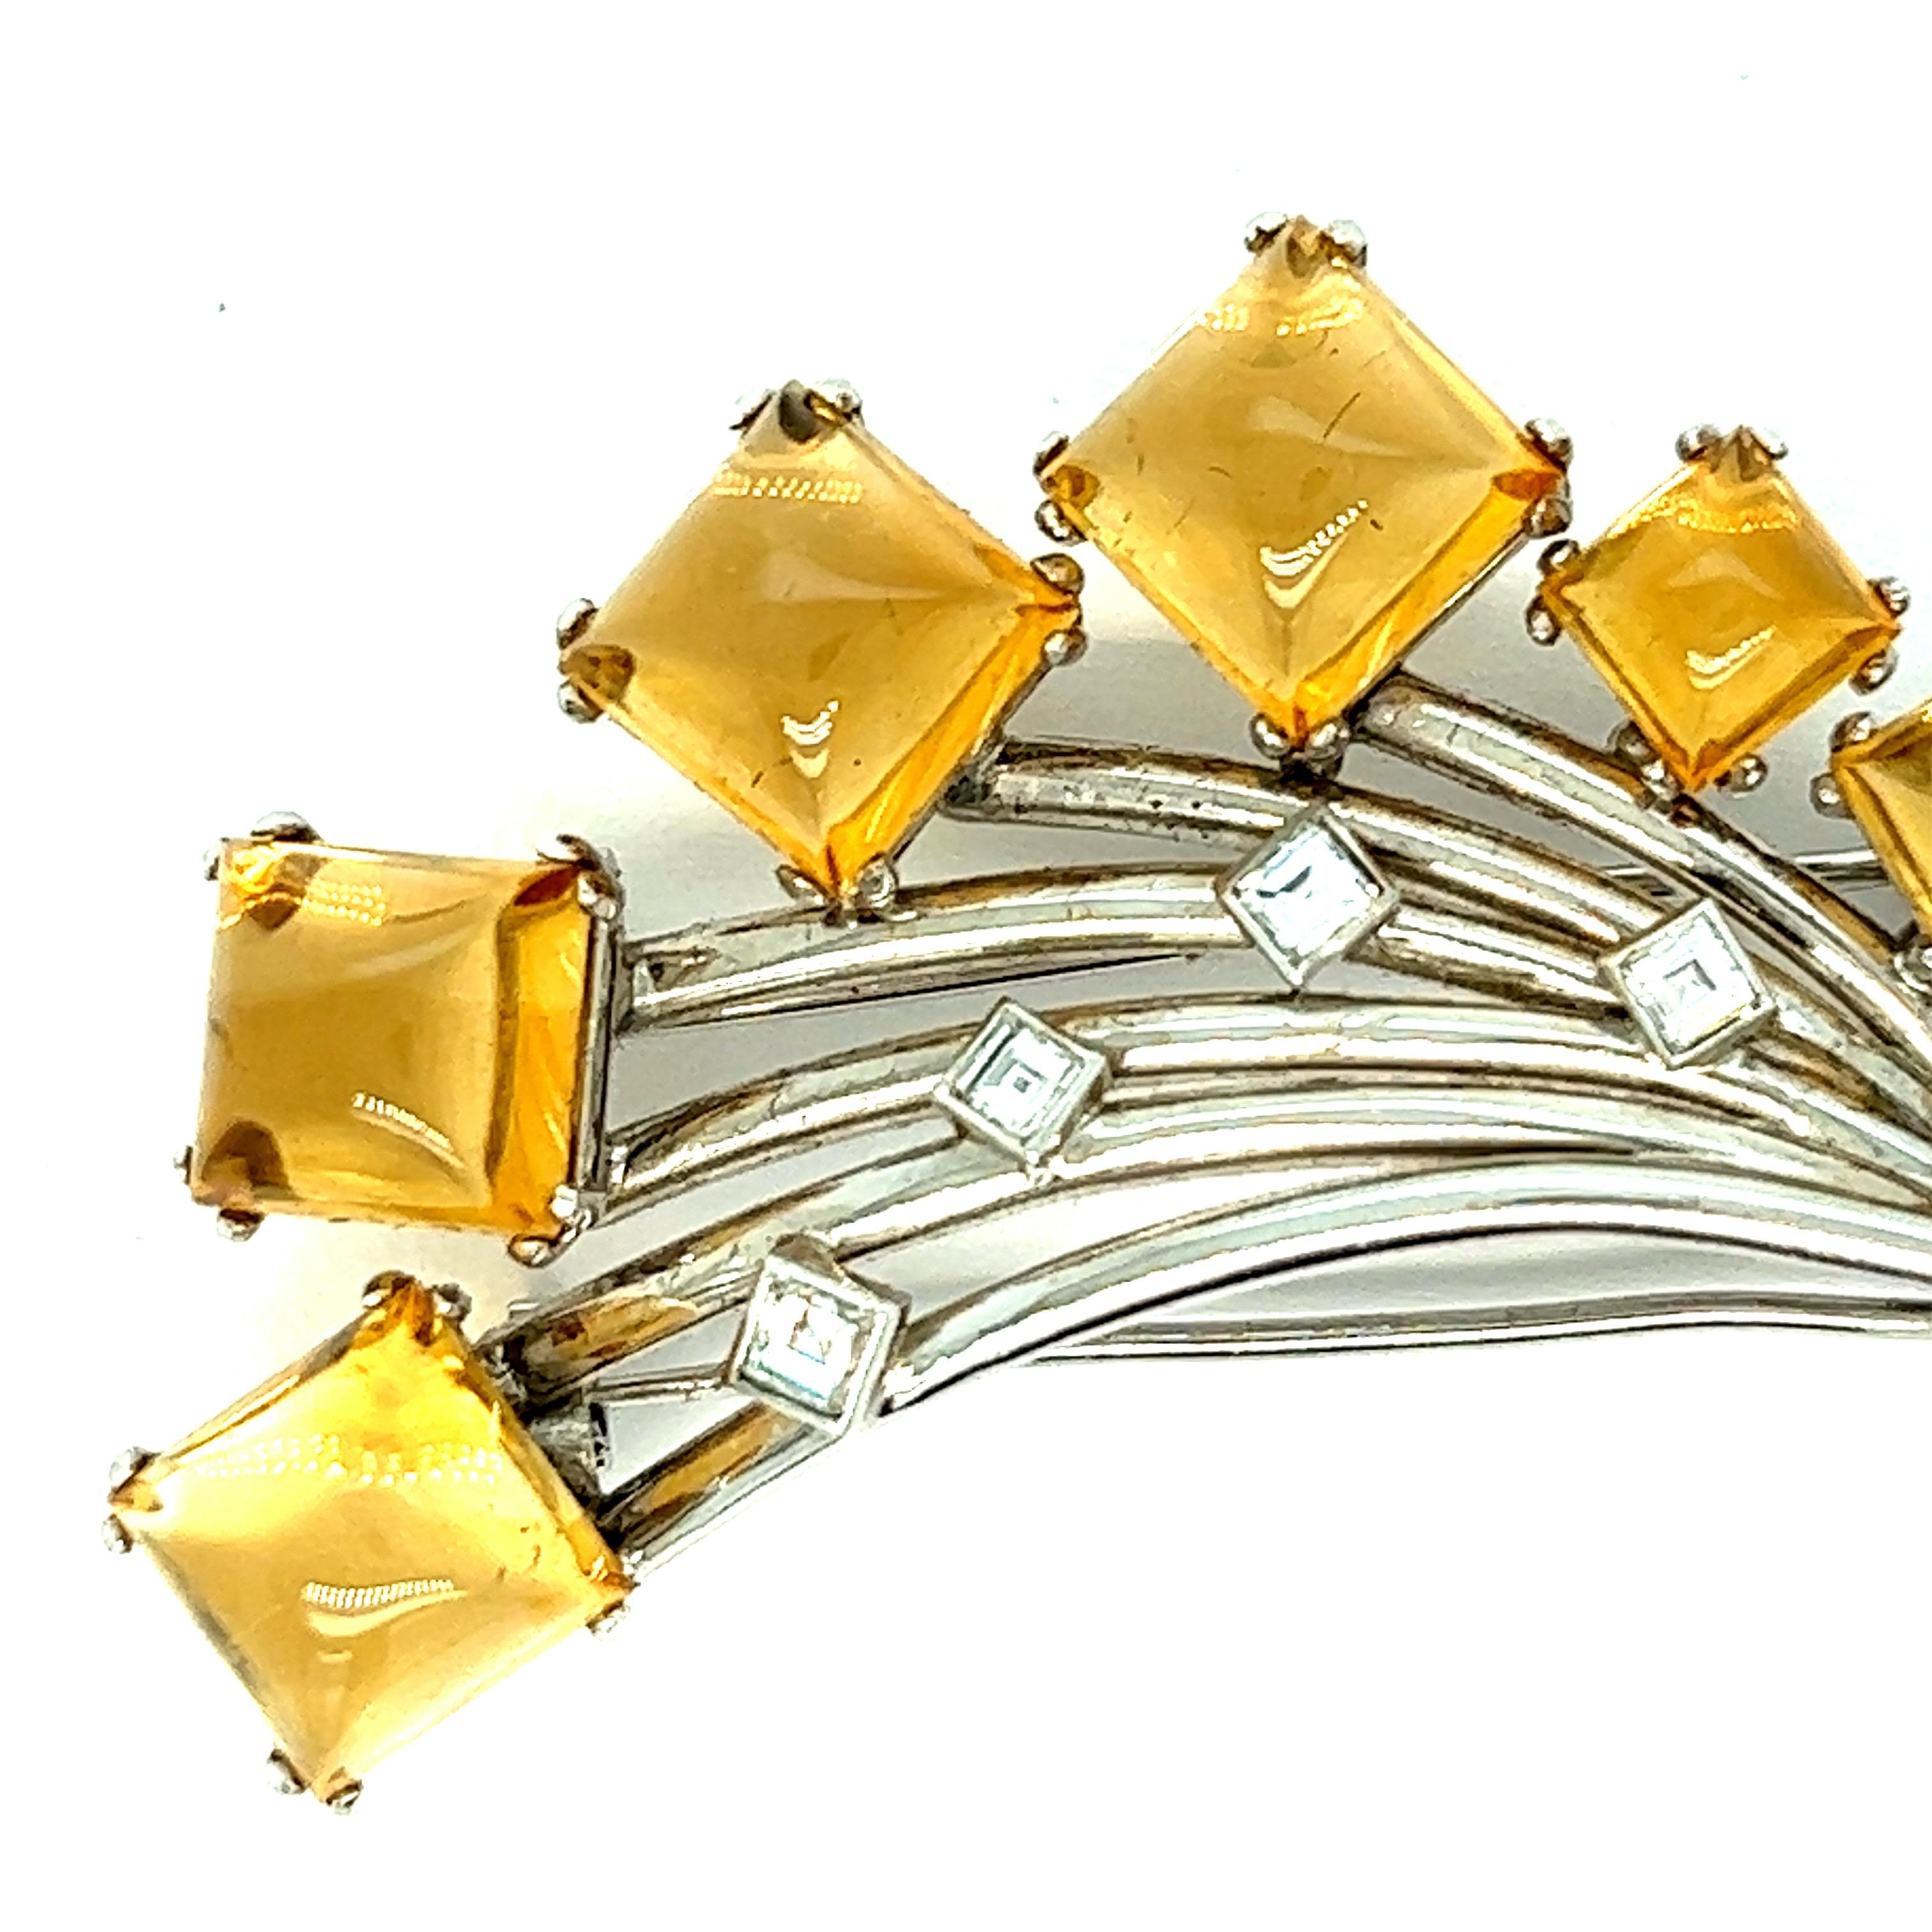 Boucheron citrine diamond brooch

Square shaped cabochon citrines and square-cut diamonds; marked Boucheron

Size: width 2.31 inches, length 1.75 inches
Total weight: 25.1 grams 